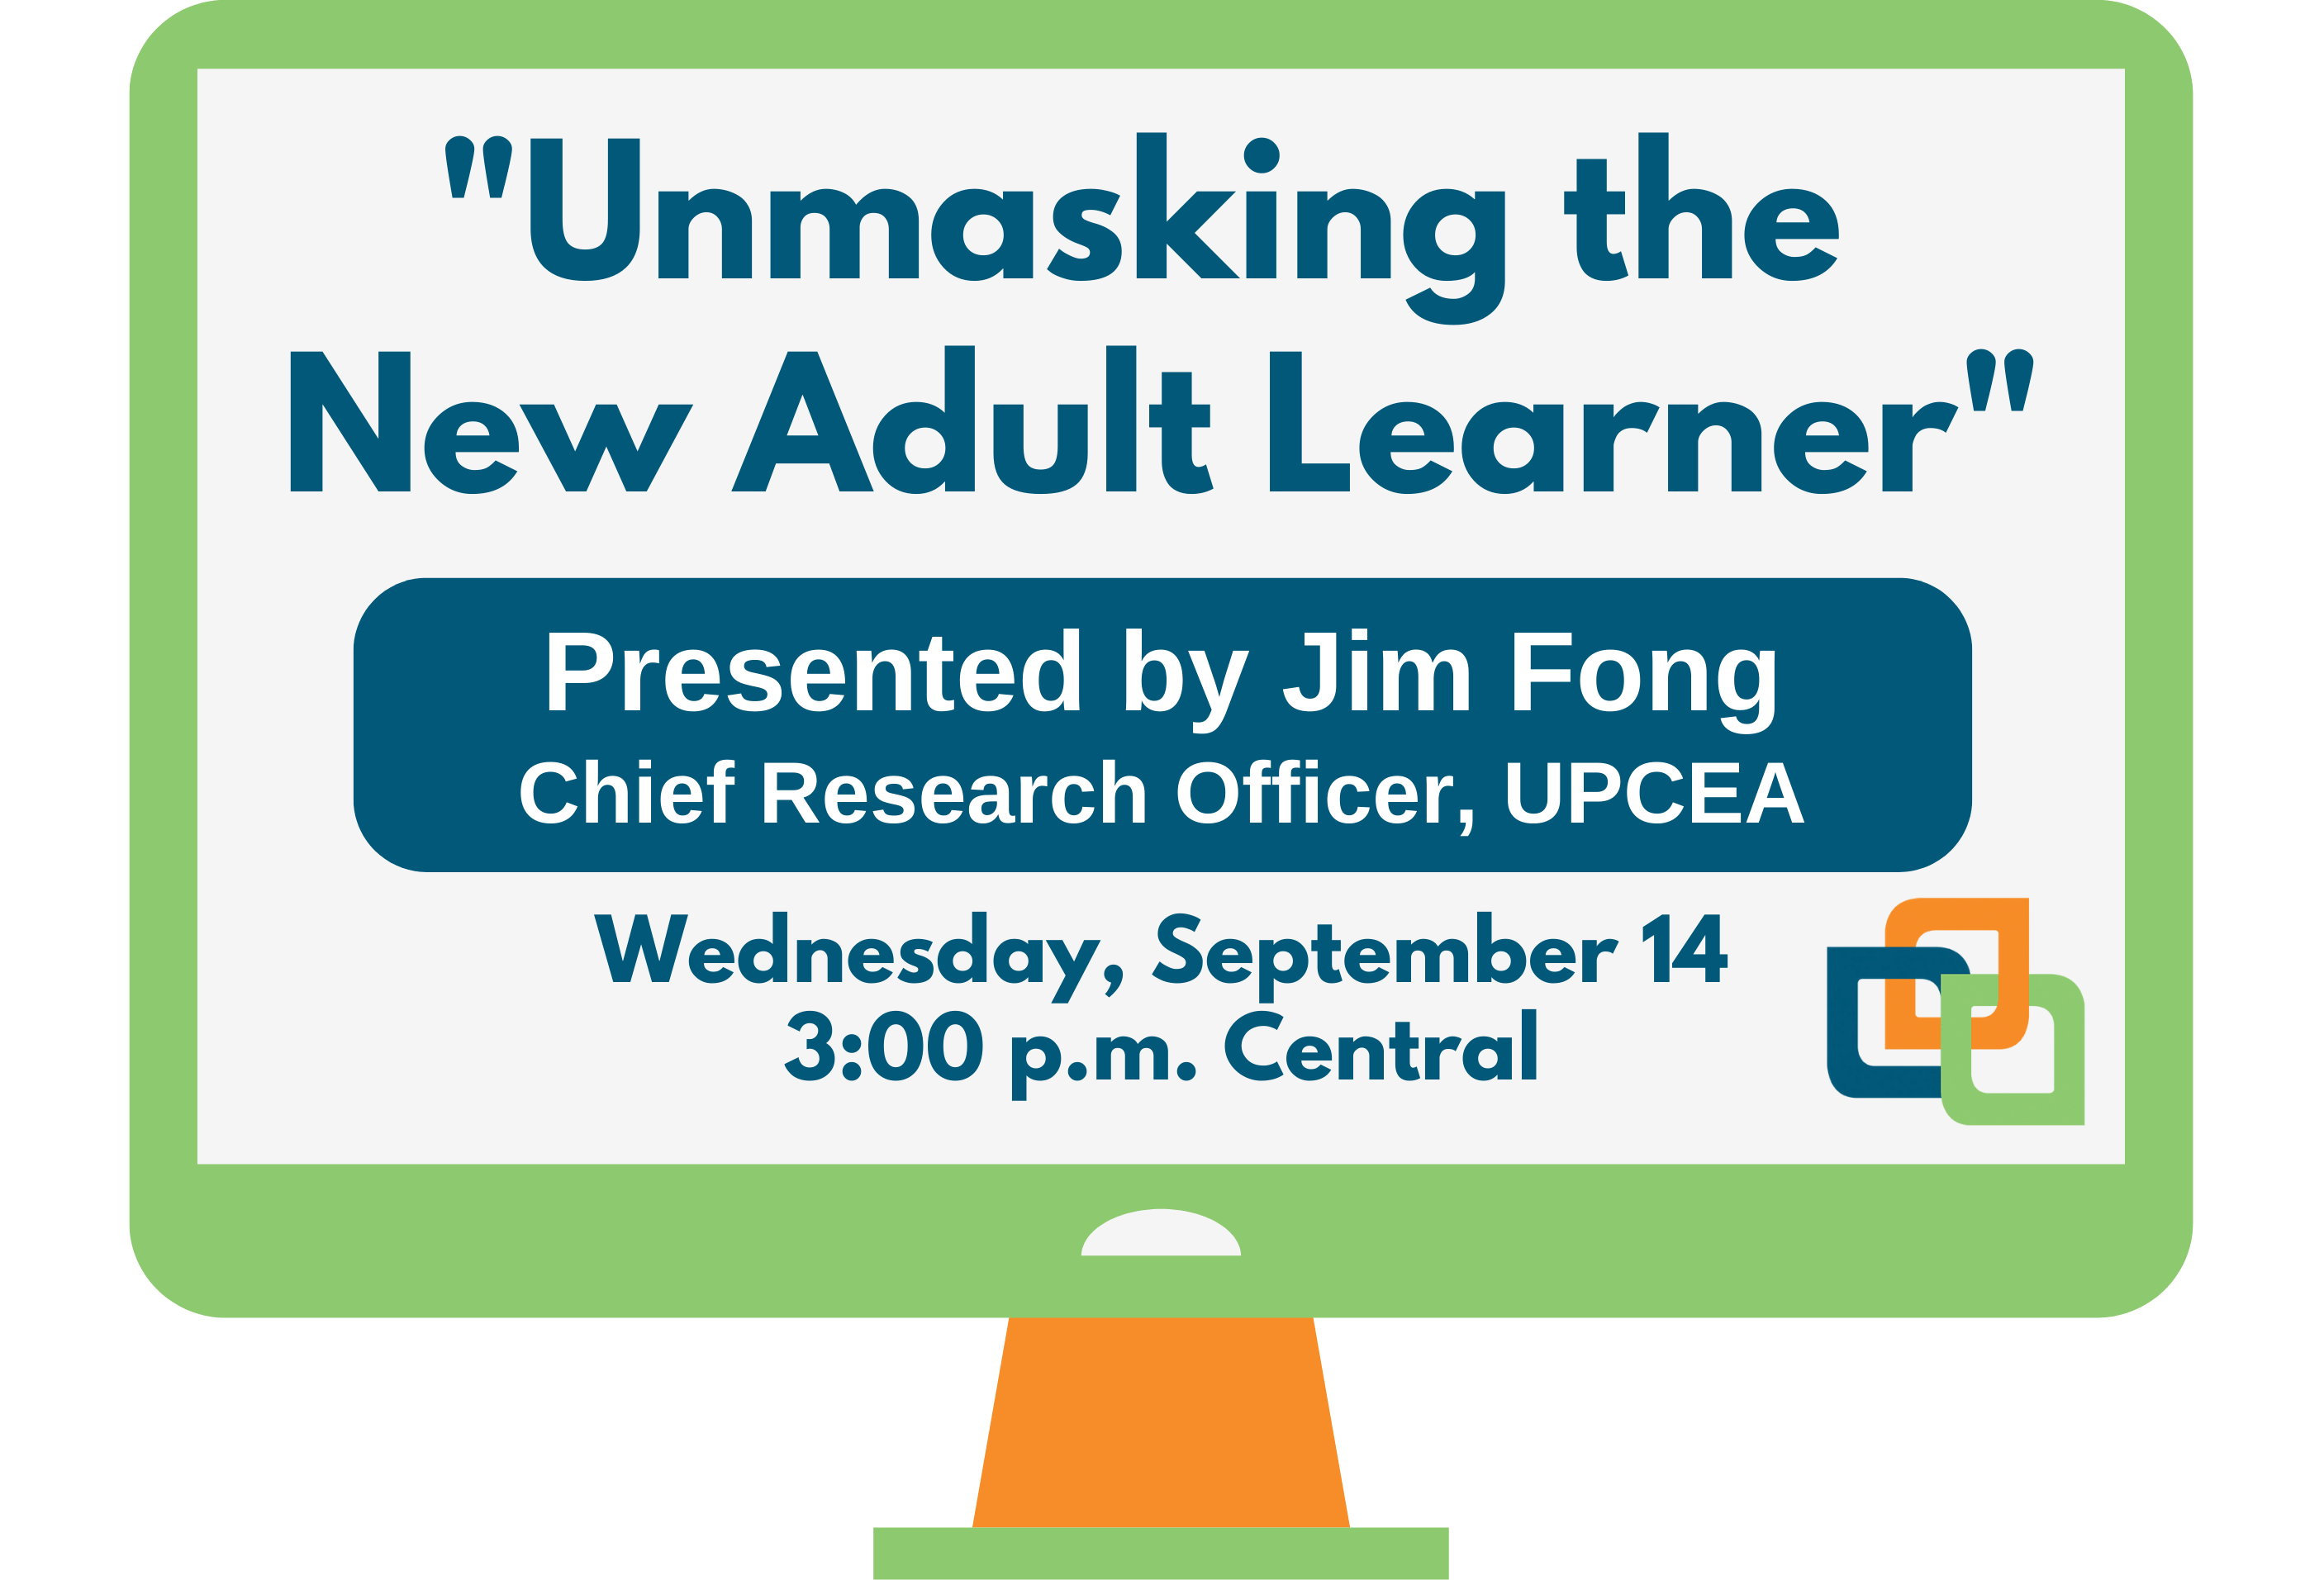 Title and presenter of the webinar. Unmasking the New Adult Learner presented by Jim Fong on Wednesday, September 14 at 3:00 p.m.